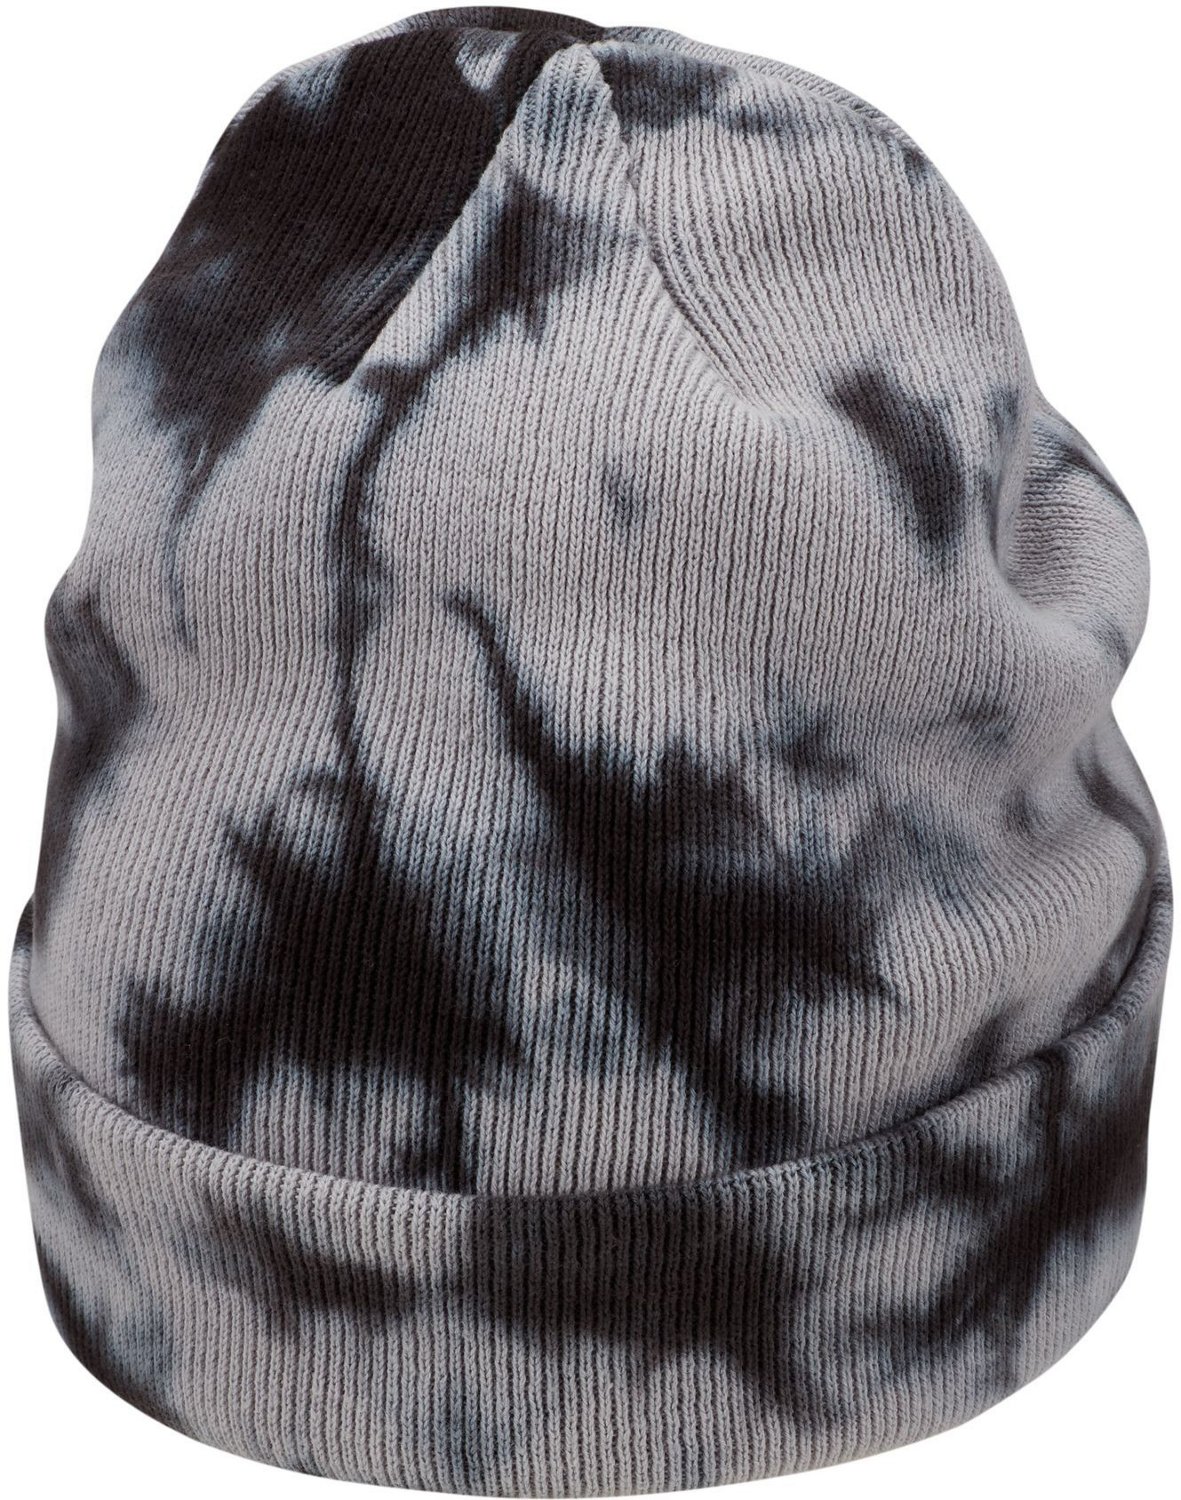 Adults\' Academy at Free Tie-Dye Nike Beanie | Terra Shipping